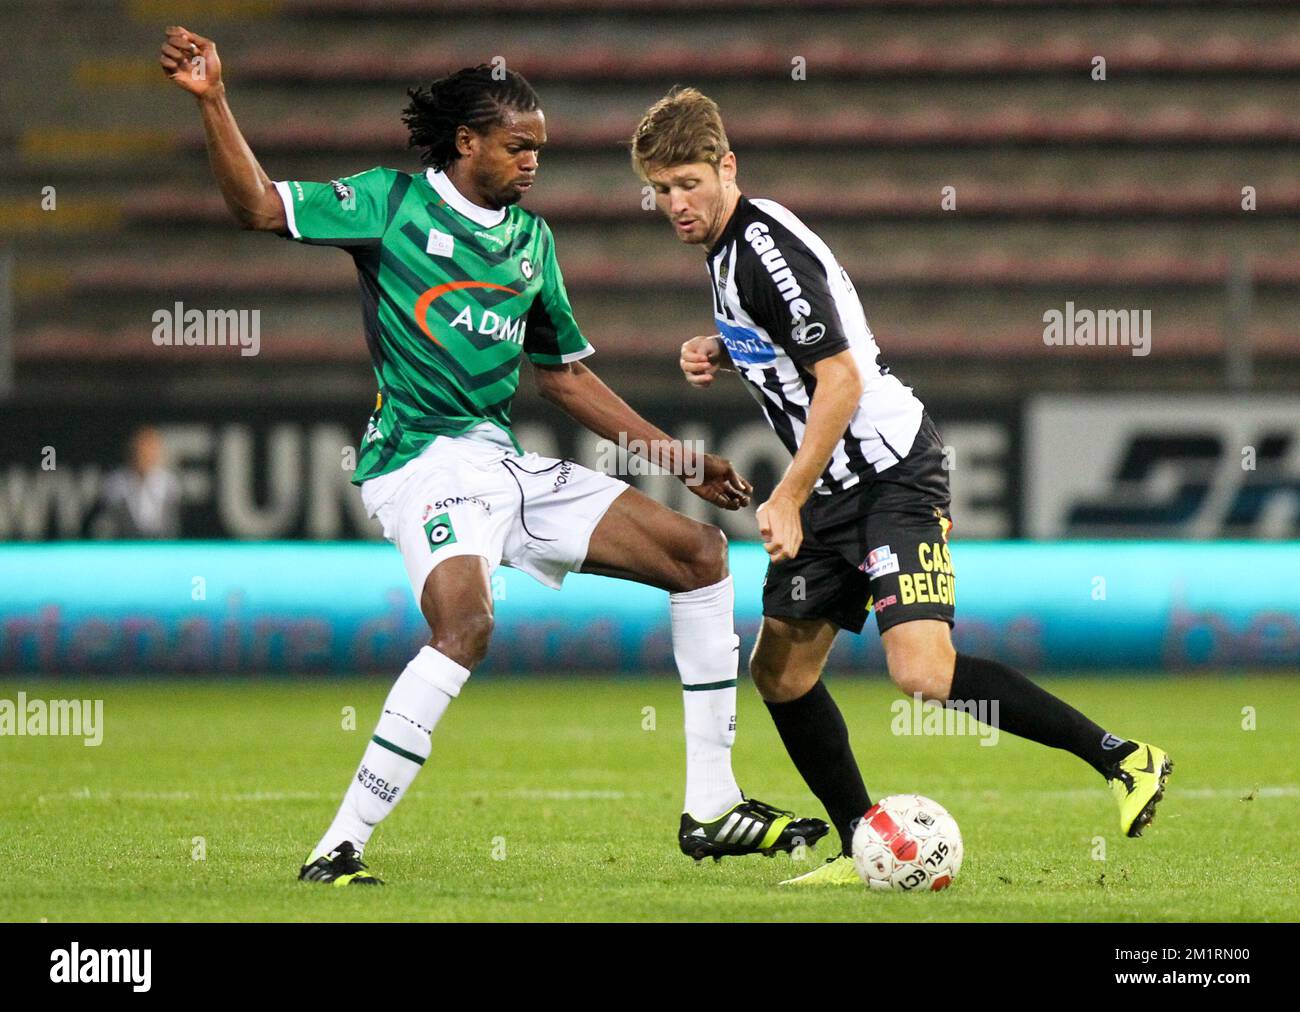 Cercle's Michael Uchebo and Charleroi's Damien Marcq fight for the ball during the Jupiler Pro League match between Sporting Charleroi and Cercle Brugge KSV, in Charleroi, Saturday 21 September 2013, on day 8 of the Belgian soccer championship. BELGA PHOTO VIRGINIE LEFOUR Stock Photo